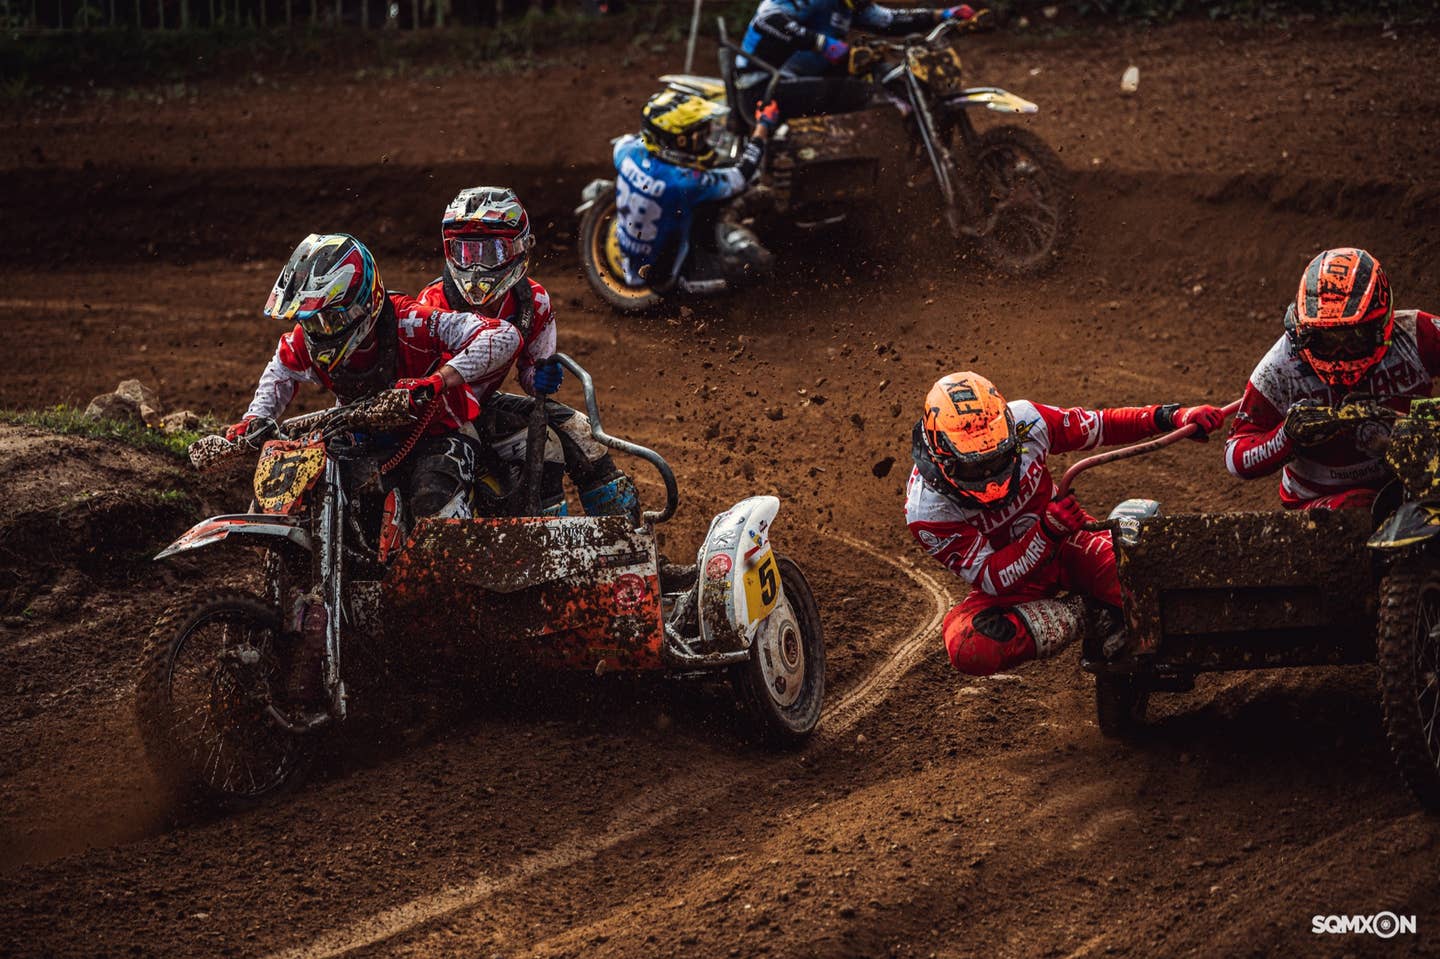 Sidecar riders hang off their machines at the 2022 WSC finale. <em>World Sidecarcross Championship/Vandraq</em>